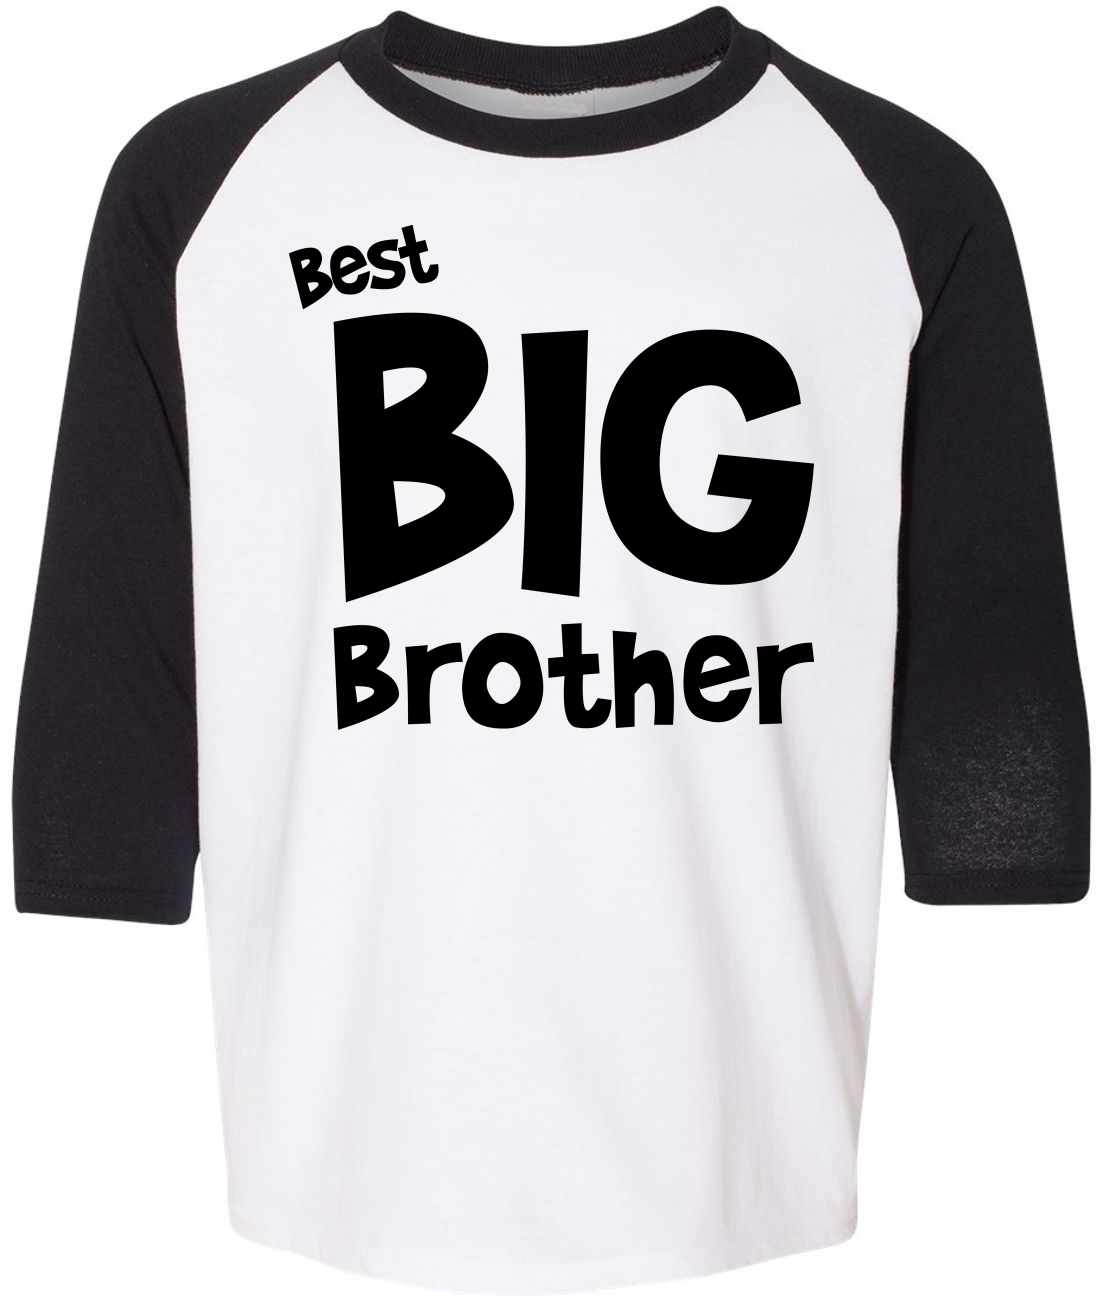 Best Big Brother on Youth Baseball Shirt